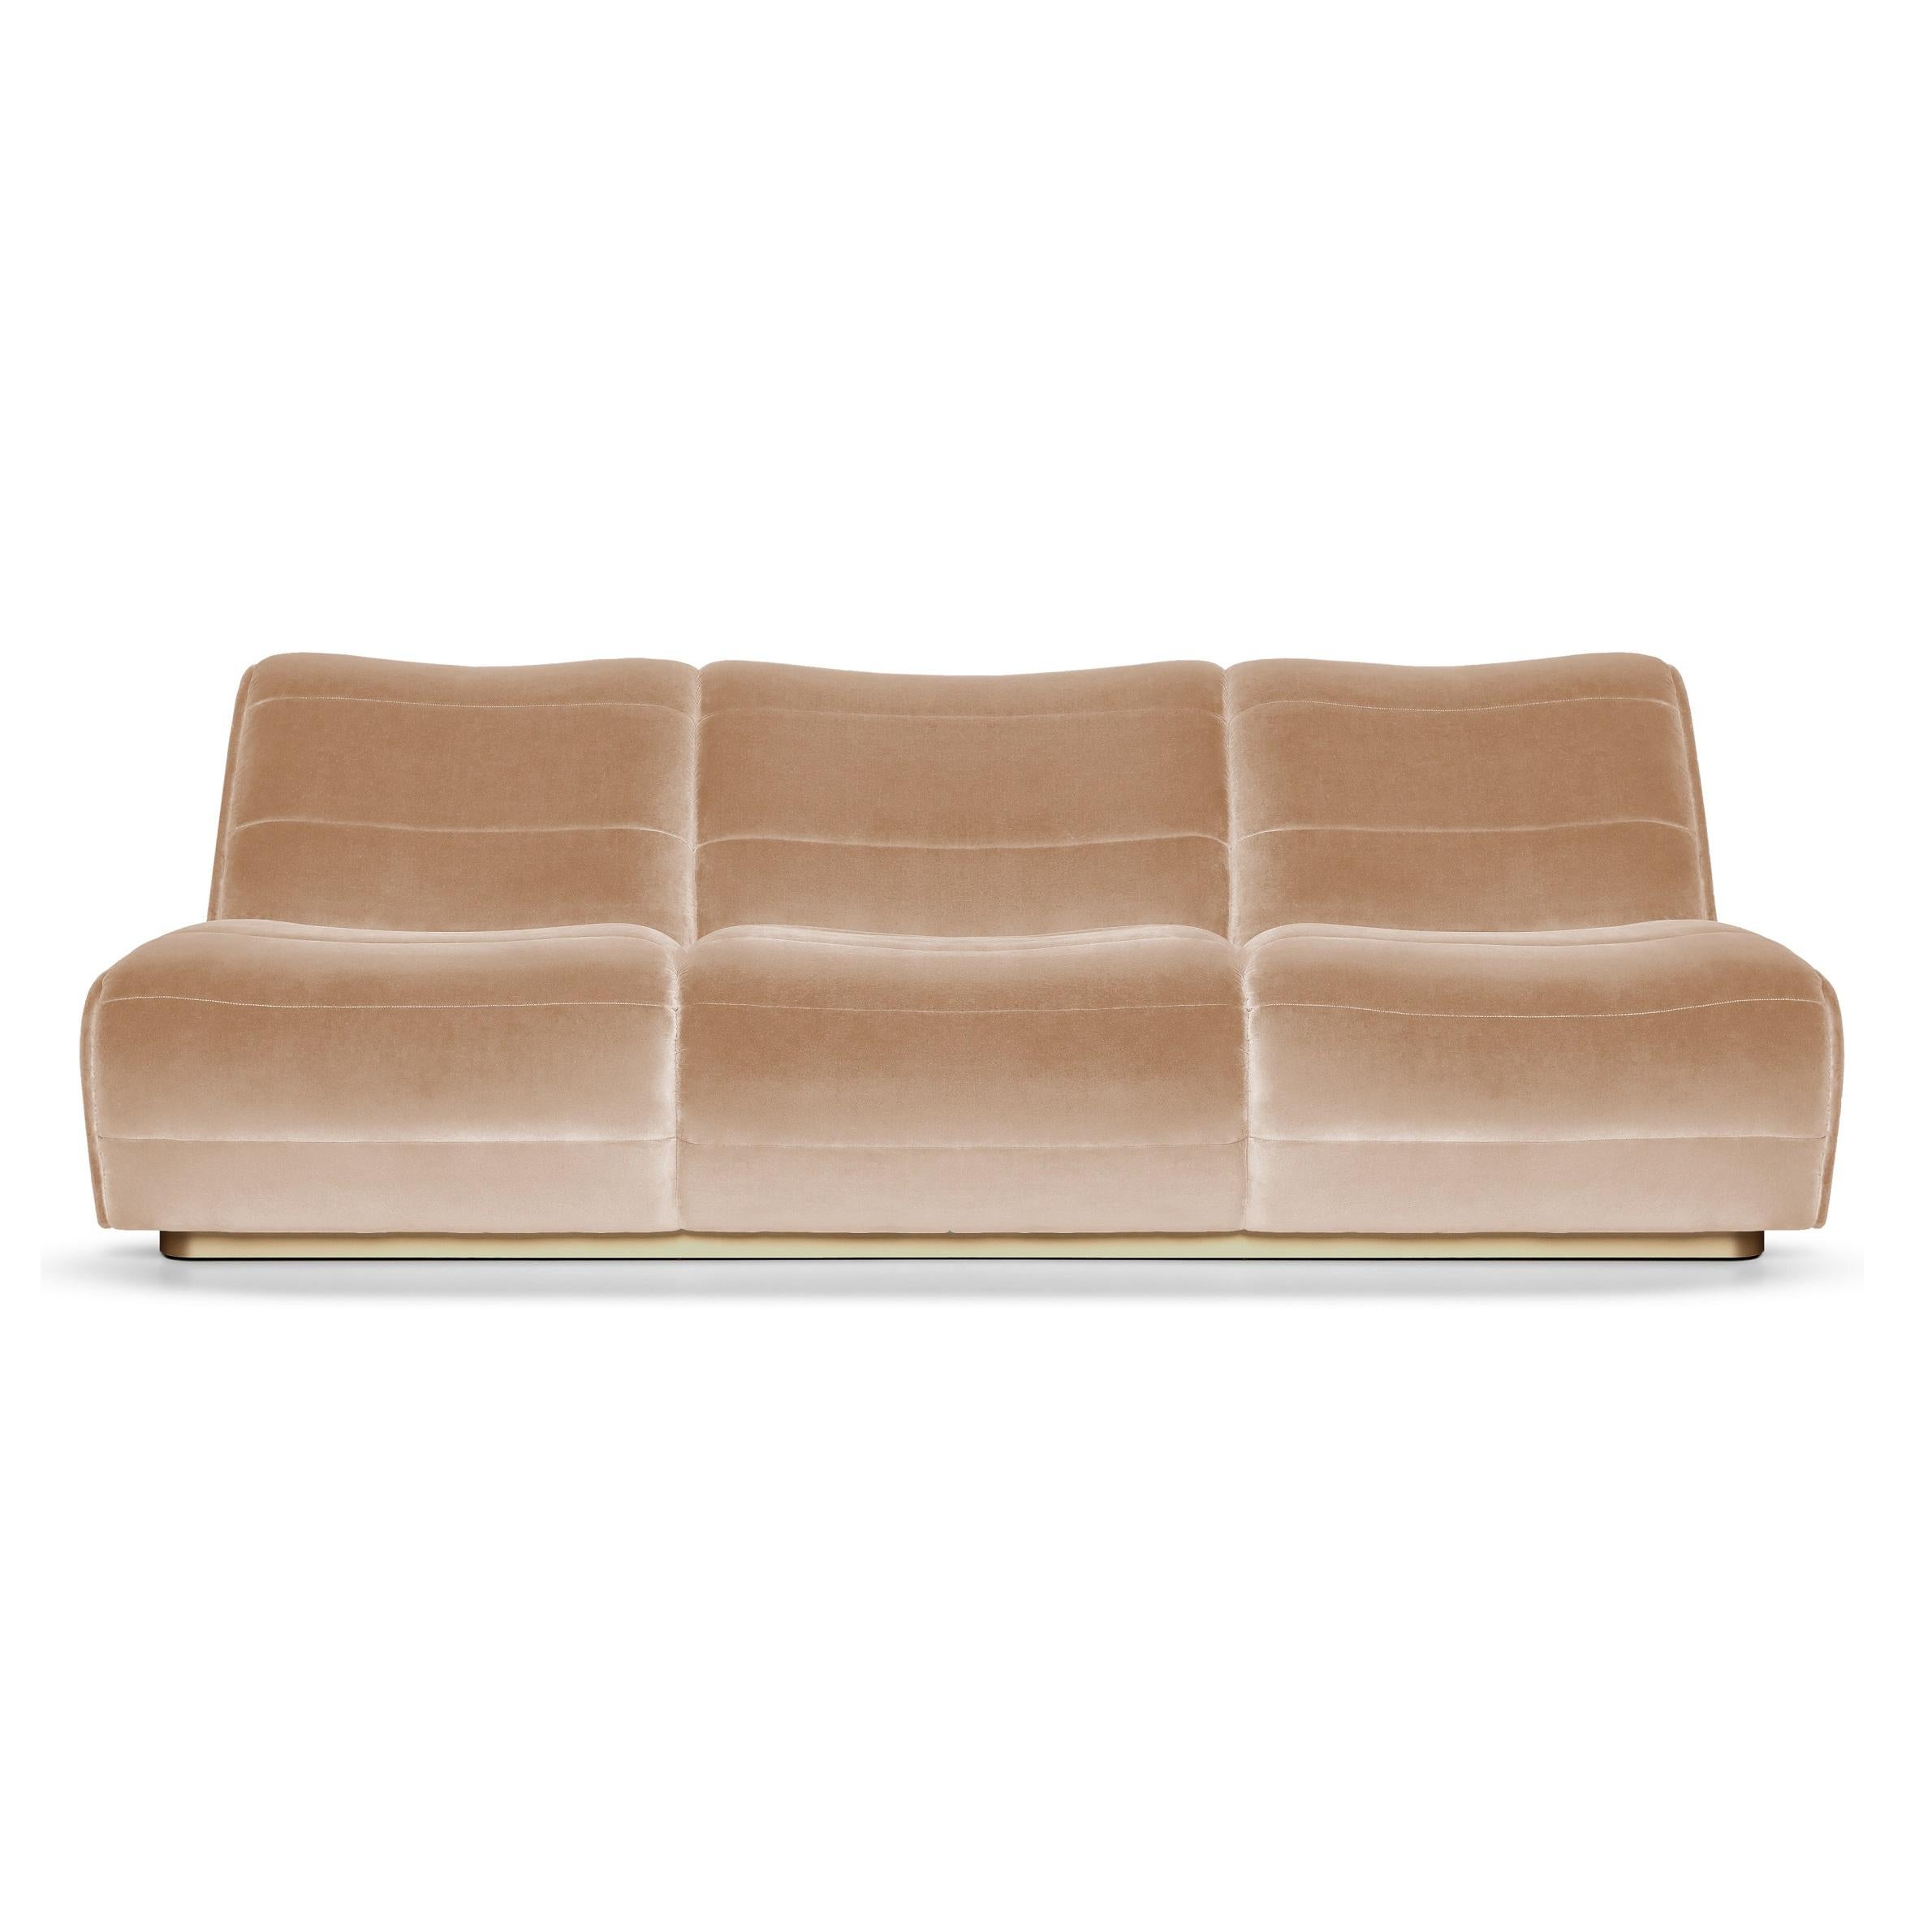 This sofa is an elevated homage to the golden age of gentleman drivers. The piece’s flawless structure is deceivingly simple, yet undeniably striking. The detailed upholstery and seaming bears the mark of true craftsmanship. Its sensuous lines are